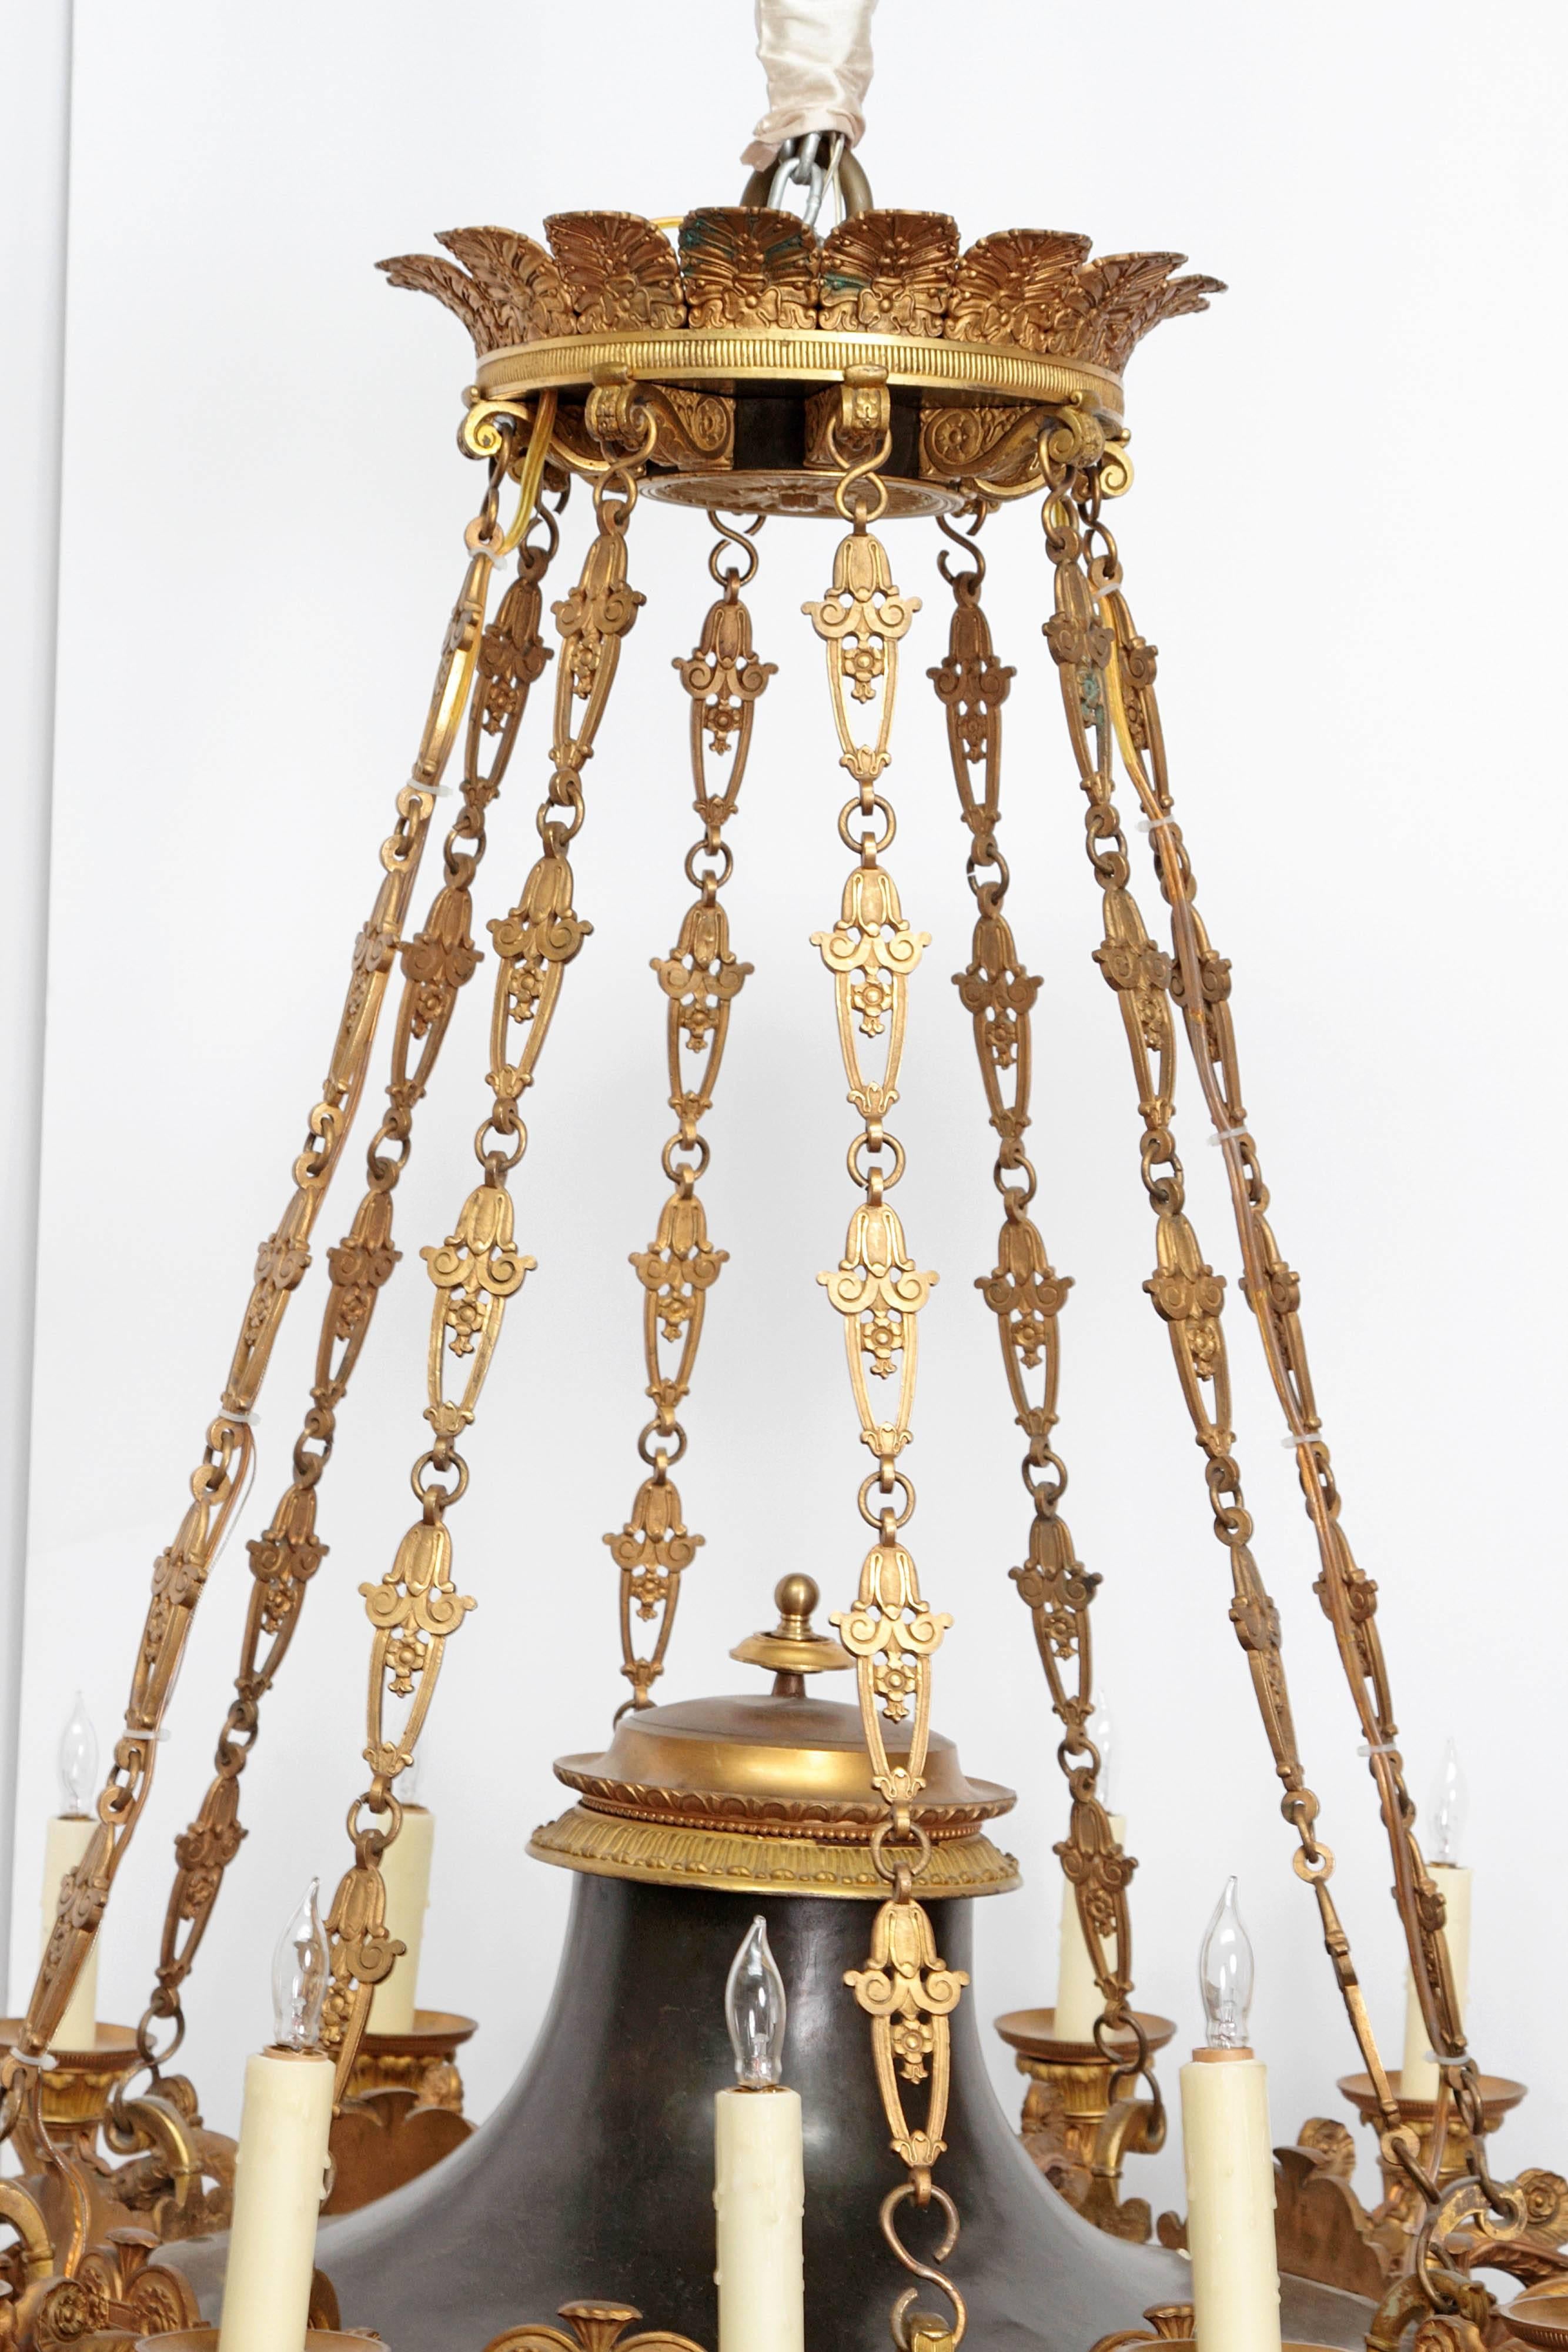 A large French Empire patinated and gilt bronze argon chandelier with 16 lights. Crown as top with palmette motif. Hanging chains supporting black disc forms with decorative trim holding lights. Centre pendant at bottom, early 19th century, France.